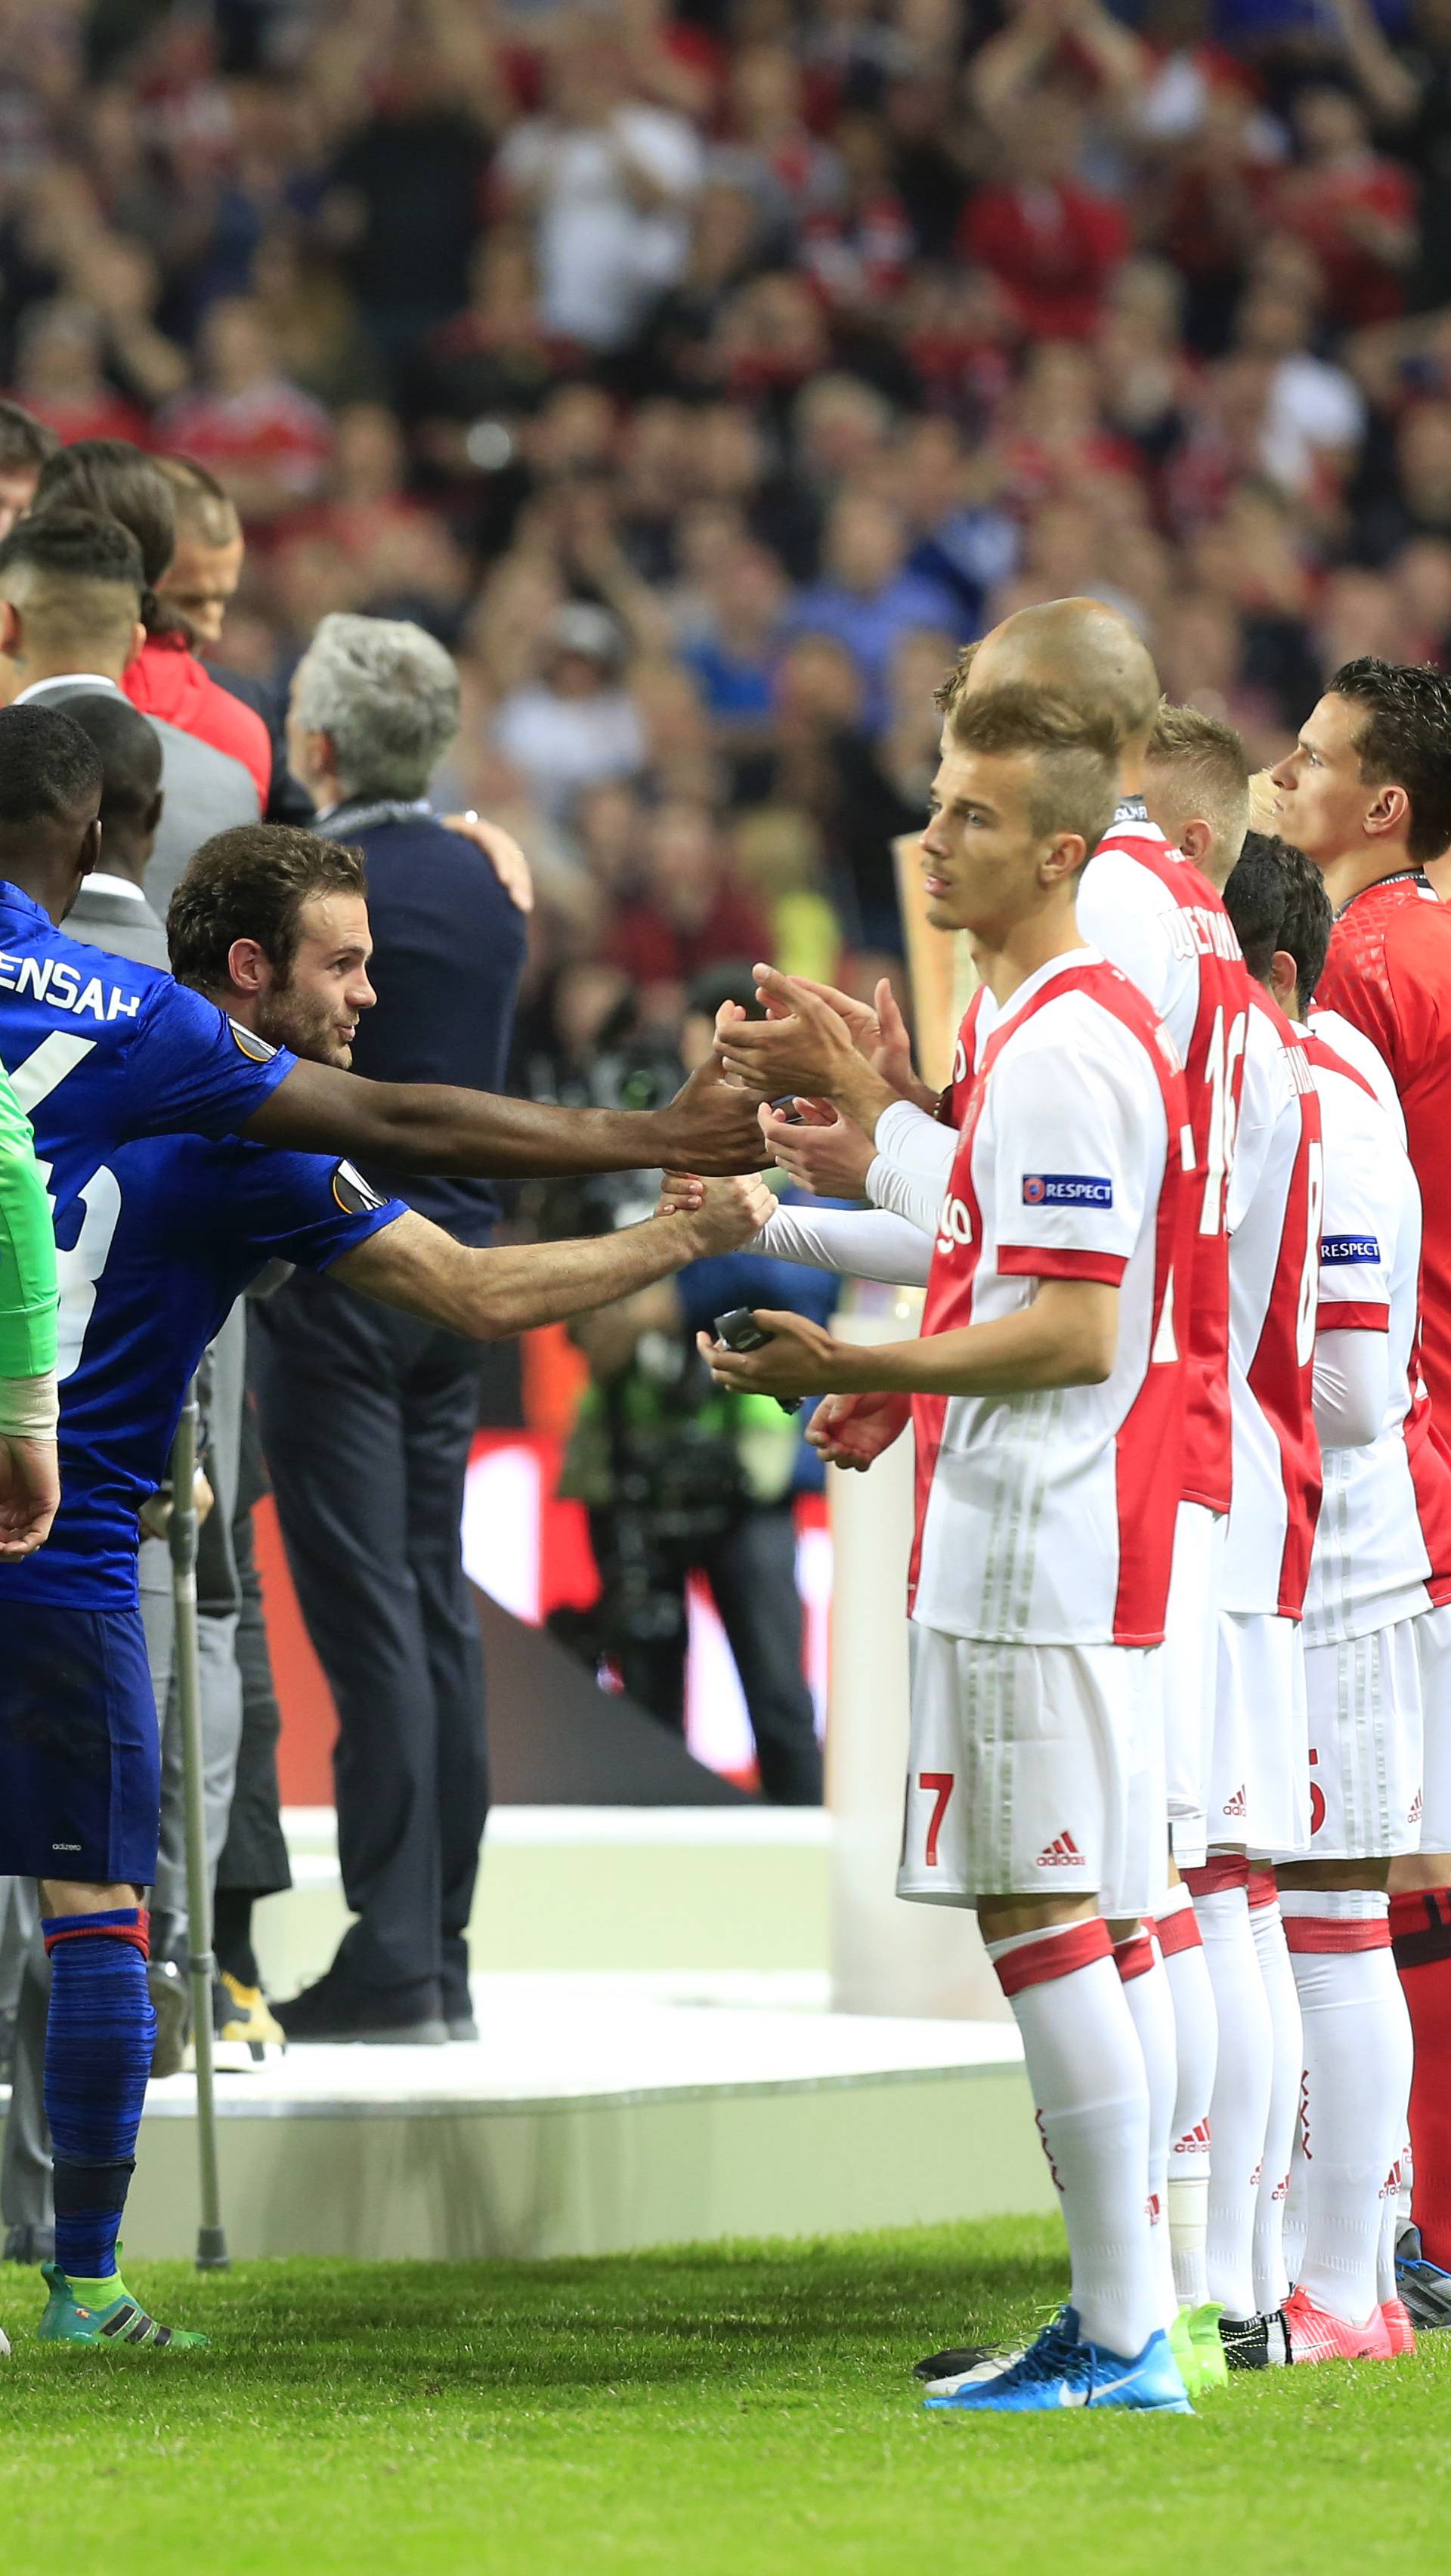 Manchester United players shake hands with Ajax players after the match